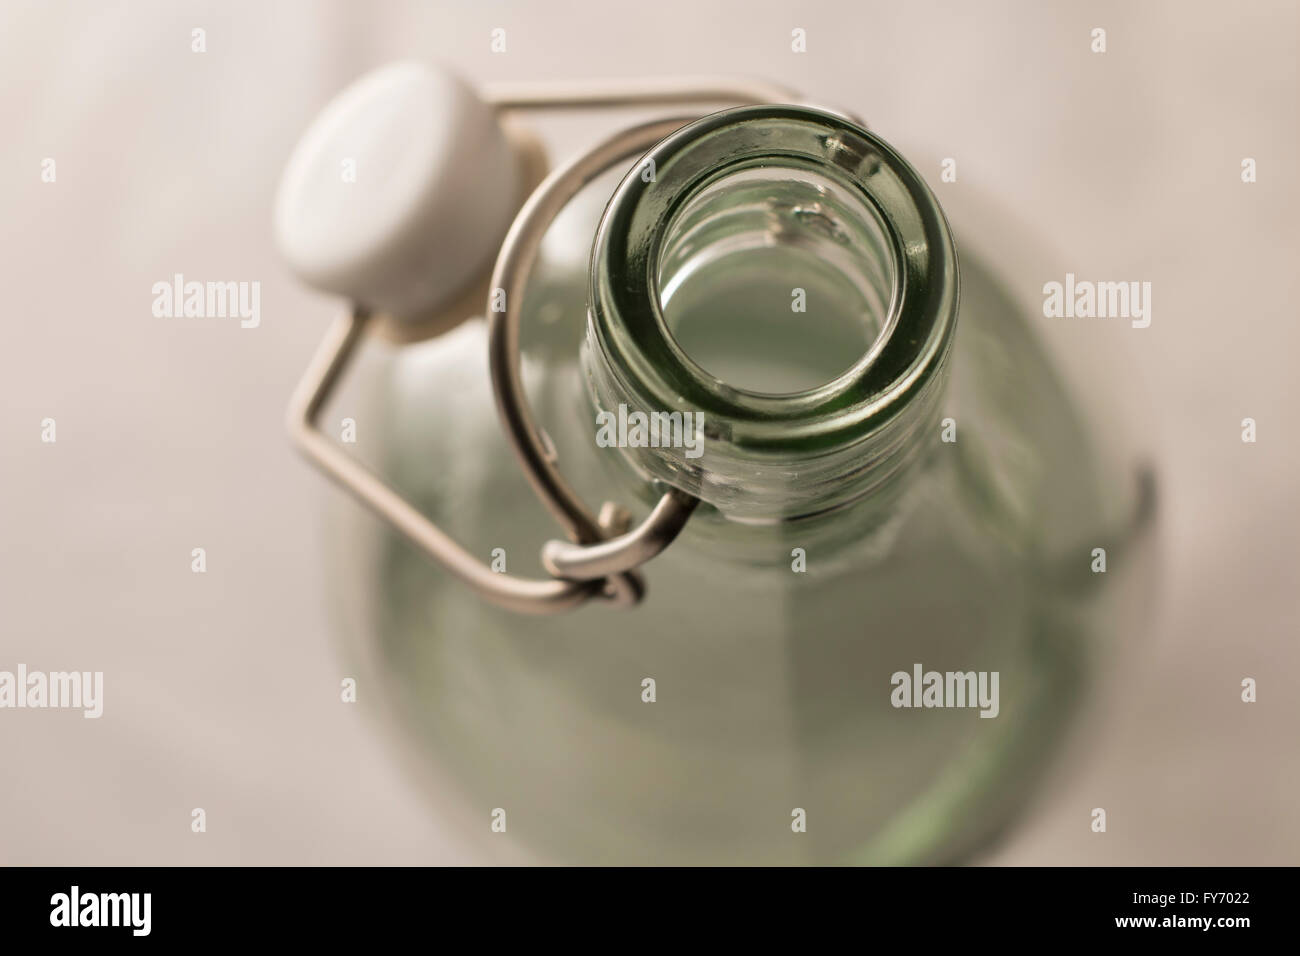 Glass bottle with stopper Stock Photo